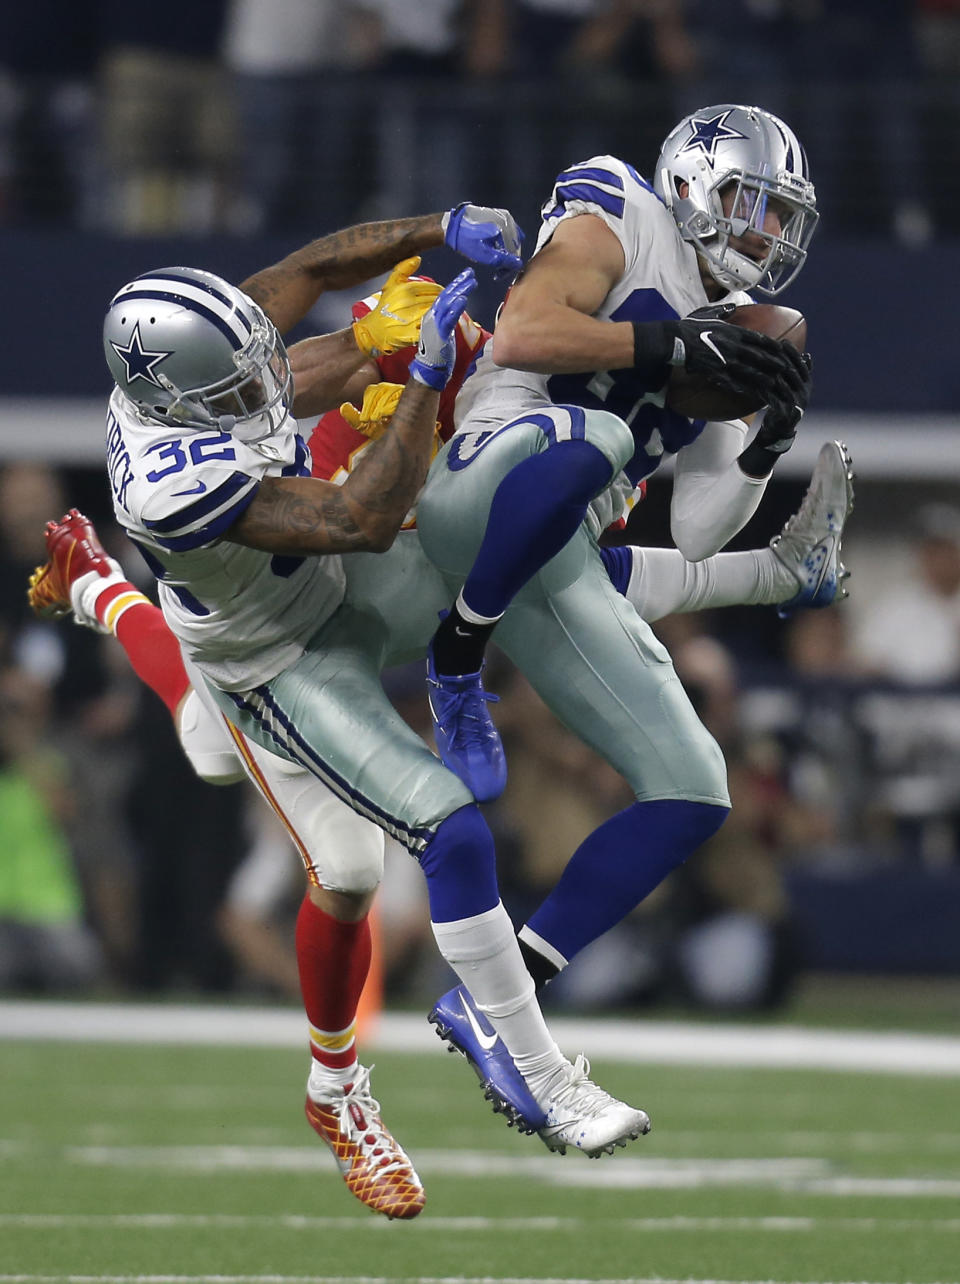 <p>Dallas Cowboys safety Jeff Heath (38) intercepts a pass in front of Orlando Scandrick (32) intended for Kansas City Chiefs tight end Travis Kelce, rear, in the second half of an NFL football game, Sunday, Nov. 5, 2017, in Arlington, Texas. (AP Photo/Brandon Wade) </p>